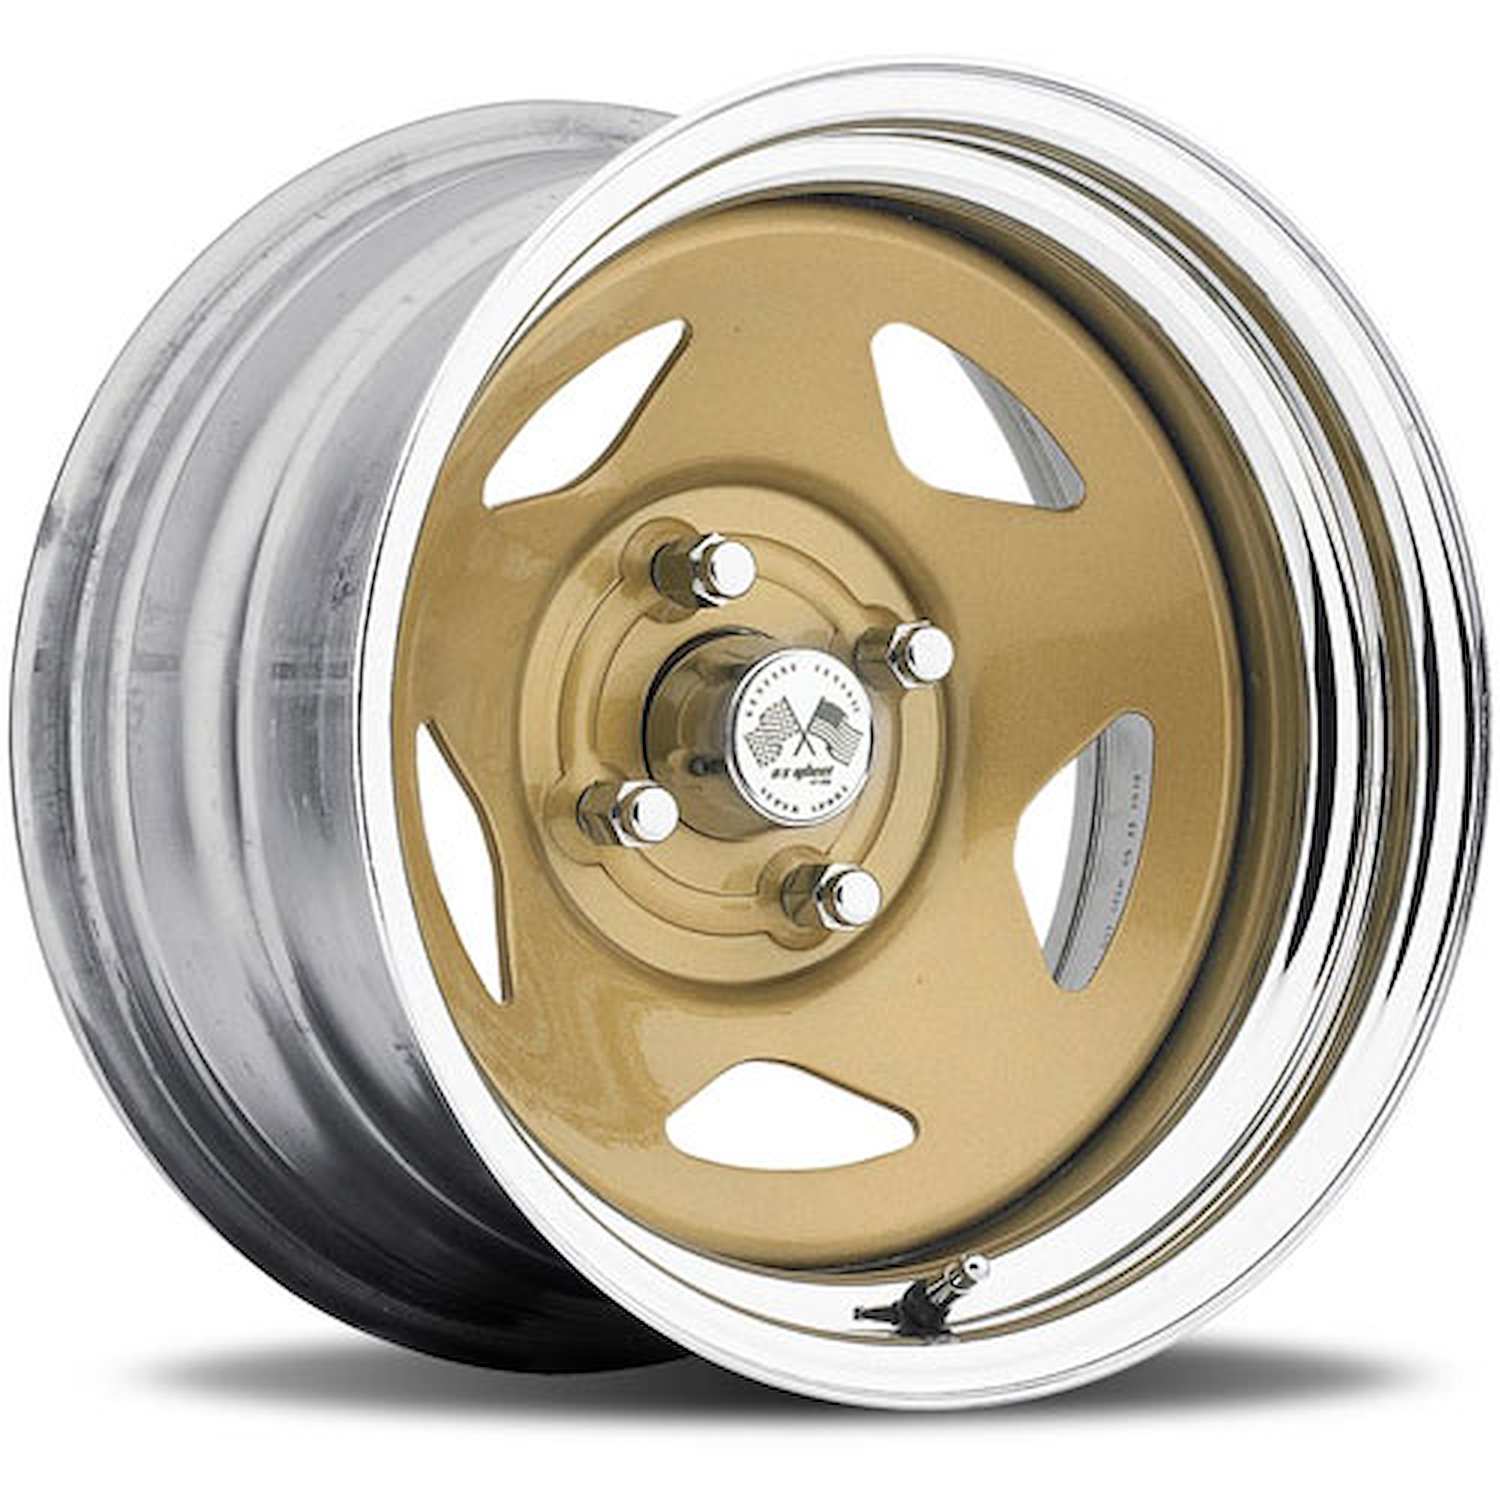 CHROME STAR FWD DRIFTER GOLD 15 x 8 4 x 100 Bolt Circle 45 Back Spacing 0 offset 266 Center Bore 1400 lbs Load Rating